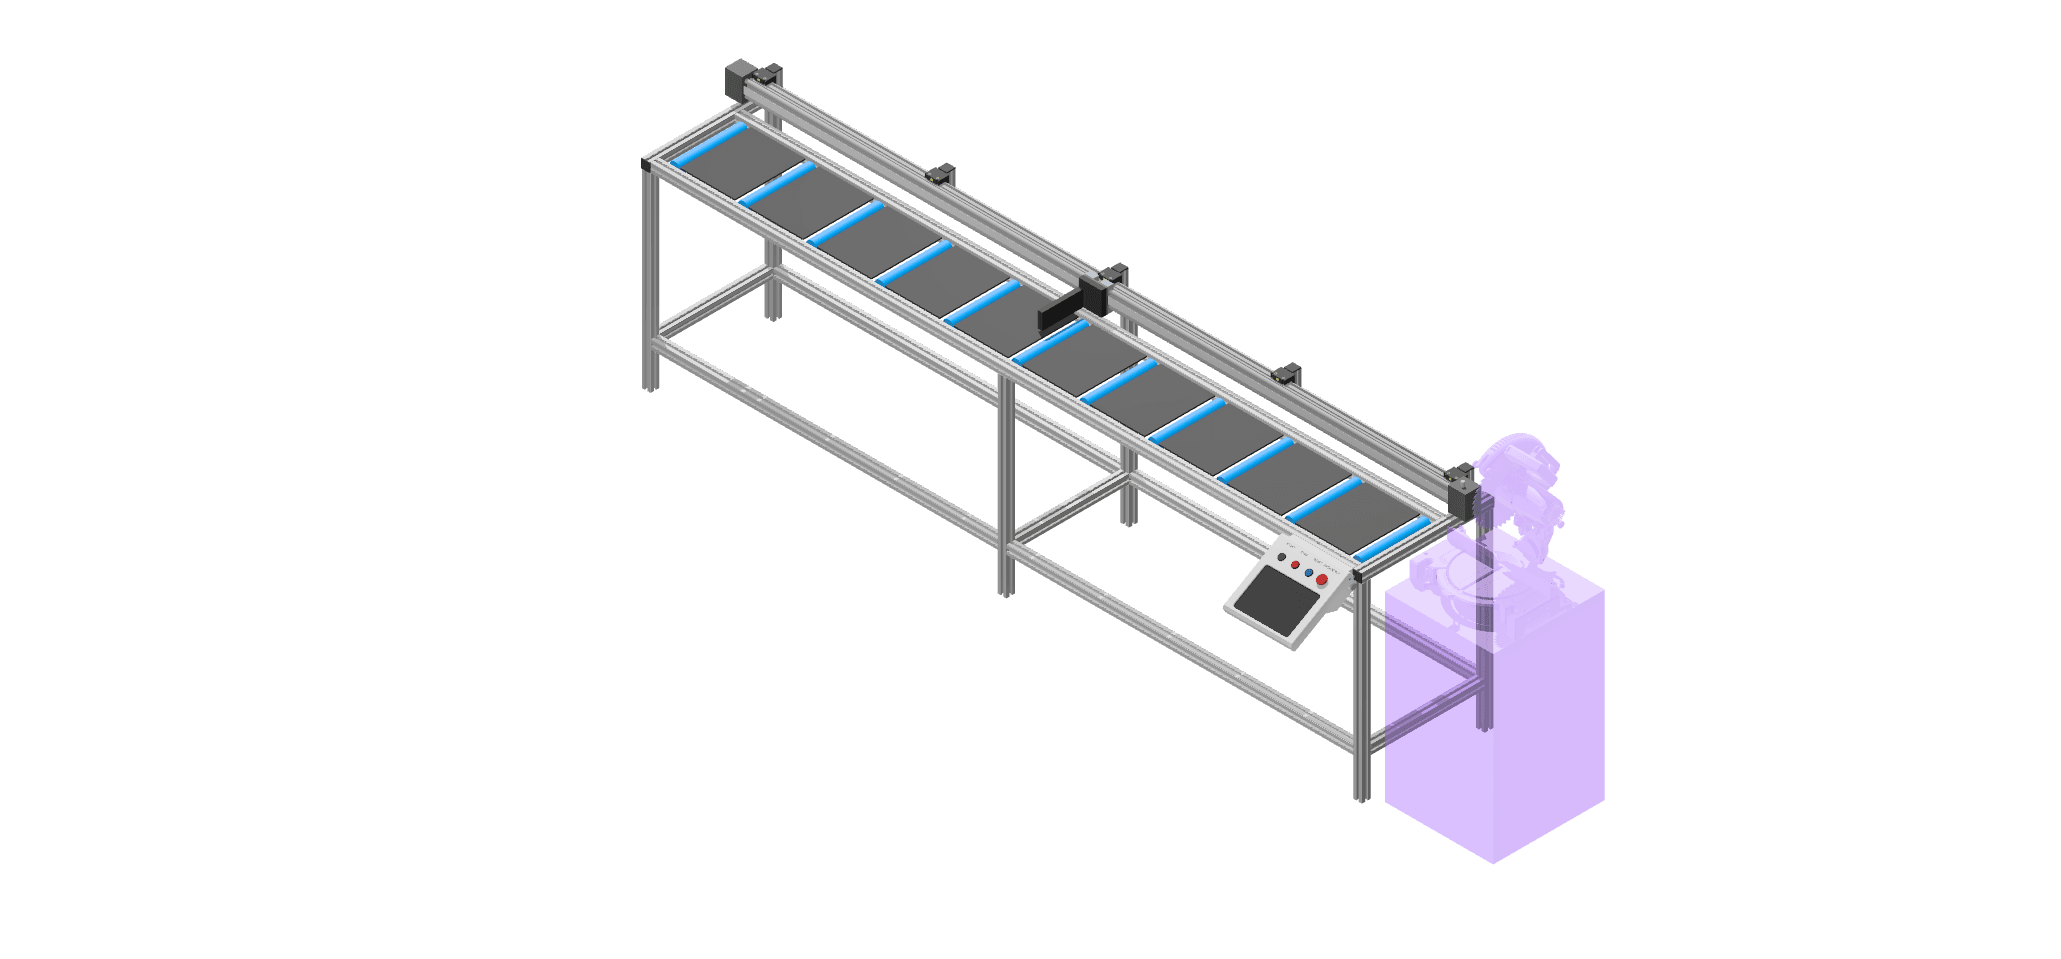 Sawing device made of aluminum profiles for igus single axles